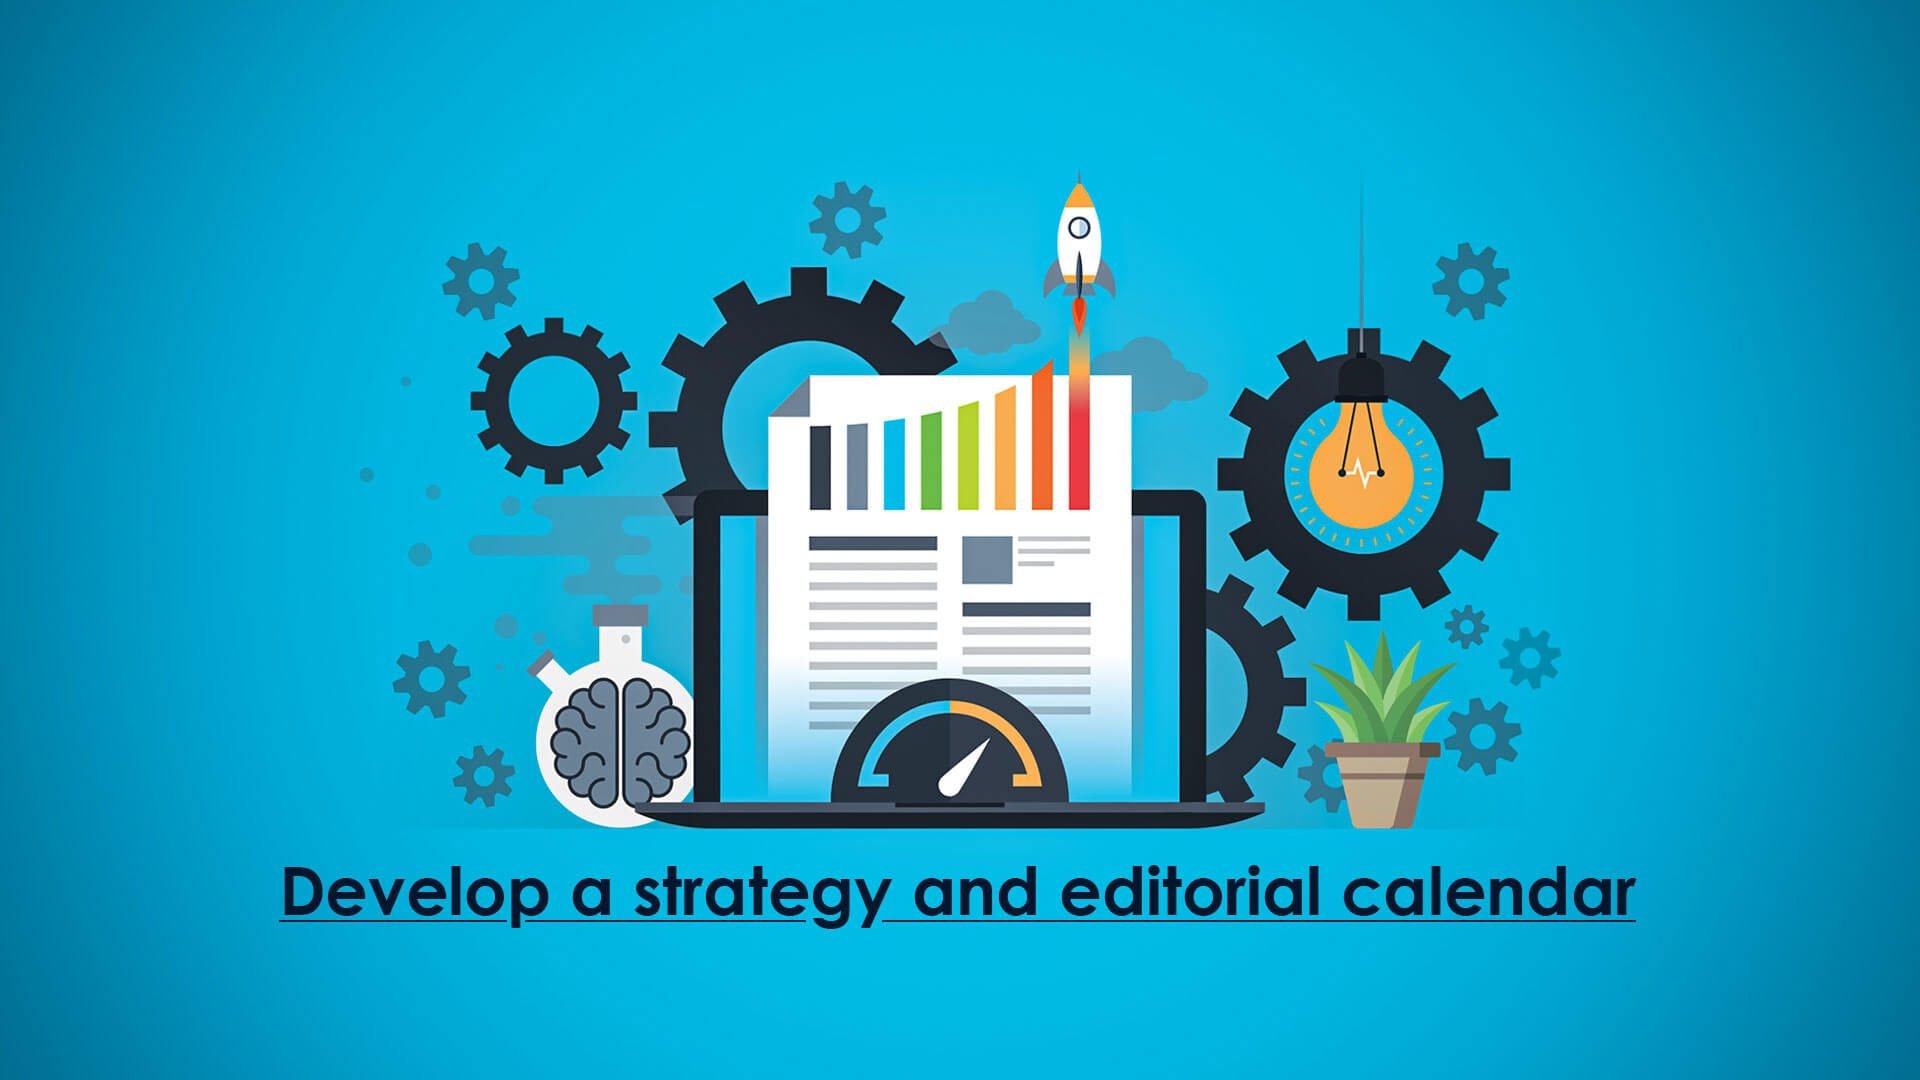 Develop a strategy and editorial calendar to make a solid digital marketing tactics